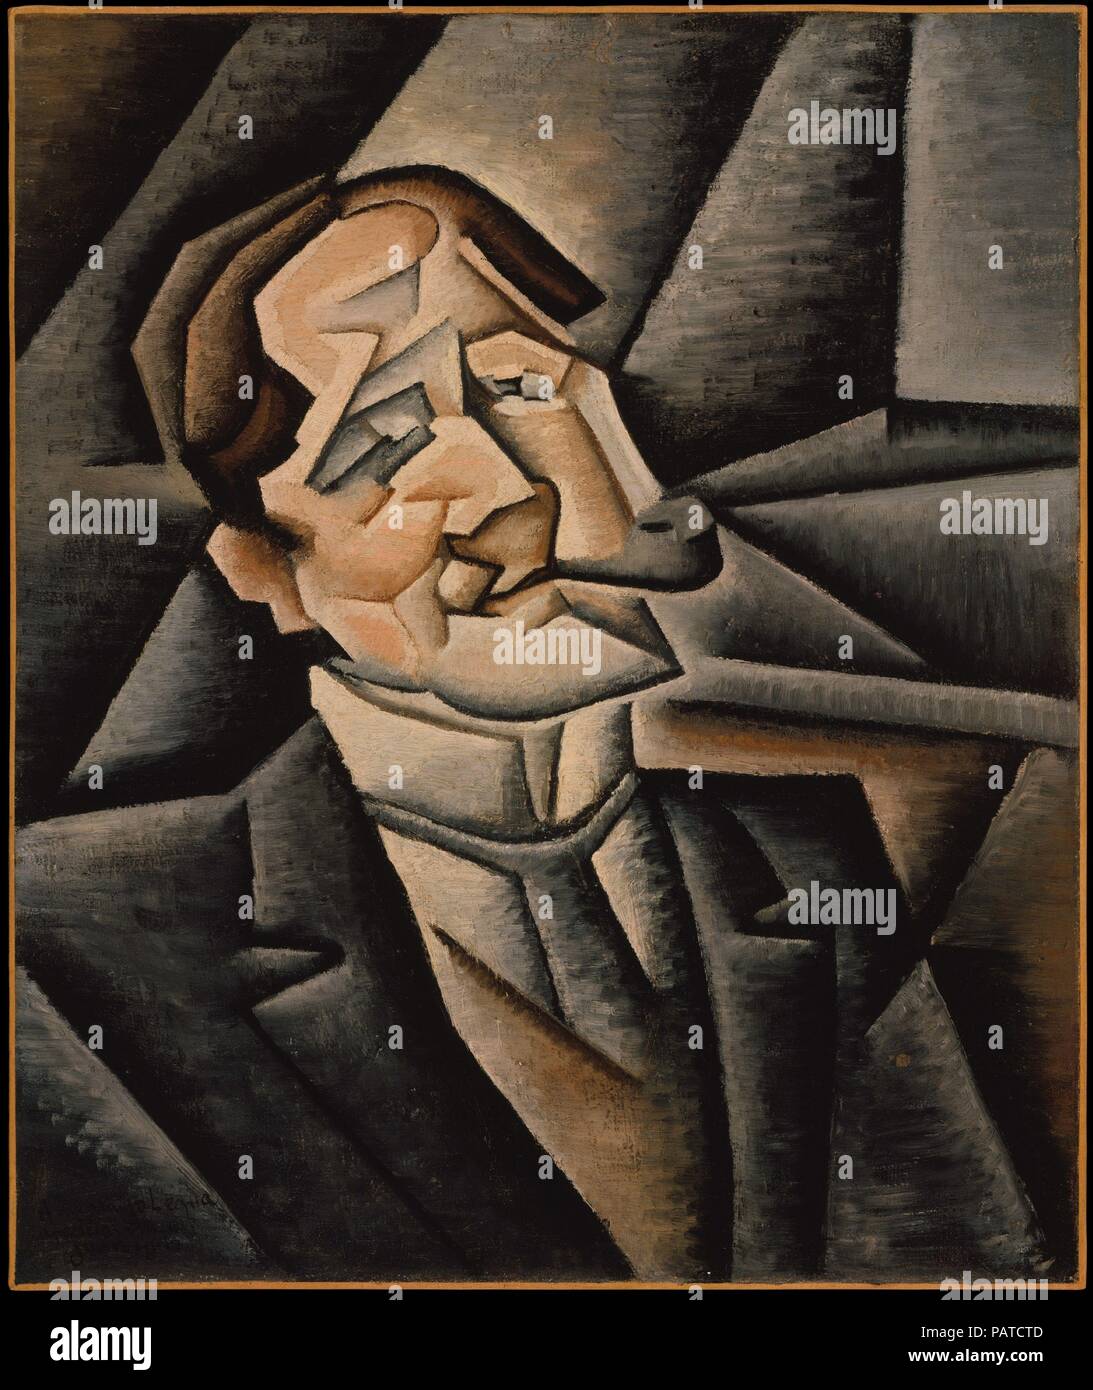 Juan Legua. Artist: Juan Gris (Spanish, Madrid 1887-1927 Boulogne-sur-Seine). Dimensions: 21 5/8 x 18 1/8 in. (54.9 x 46 cm). Date: 1911.  The rosy features of the sitter's face have a humorous expression, distinguishing Juan Gris's work from Picasso's Cubist portraits of the same year. Until 1910 Gris had worked as an illustrator, supplying magazines with satirical drawings. He took the name 'Juan Gris' shortly before moving from his native Madrid to Paris in 1906. Museum: Metropolitan Museum of Art, New York, USA. Stock Photo